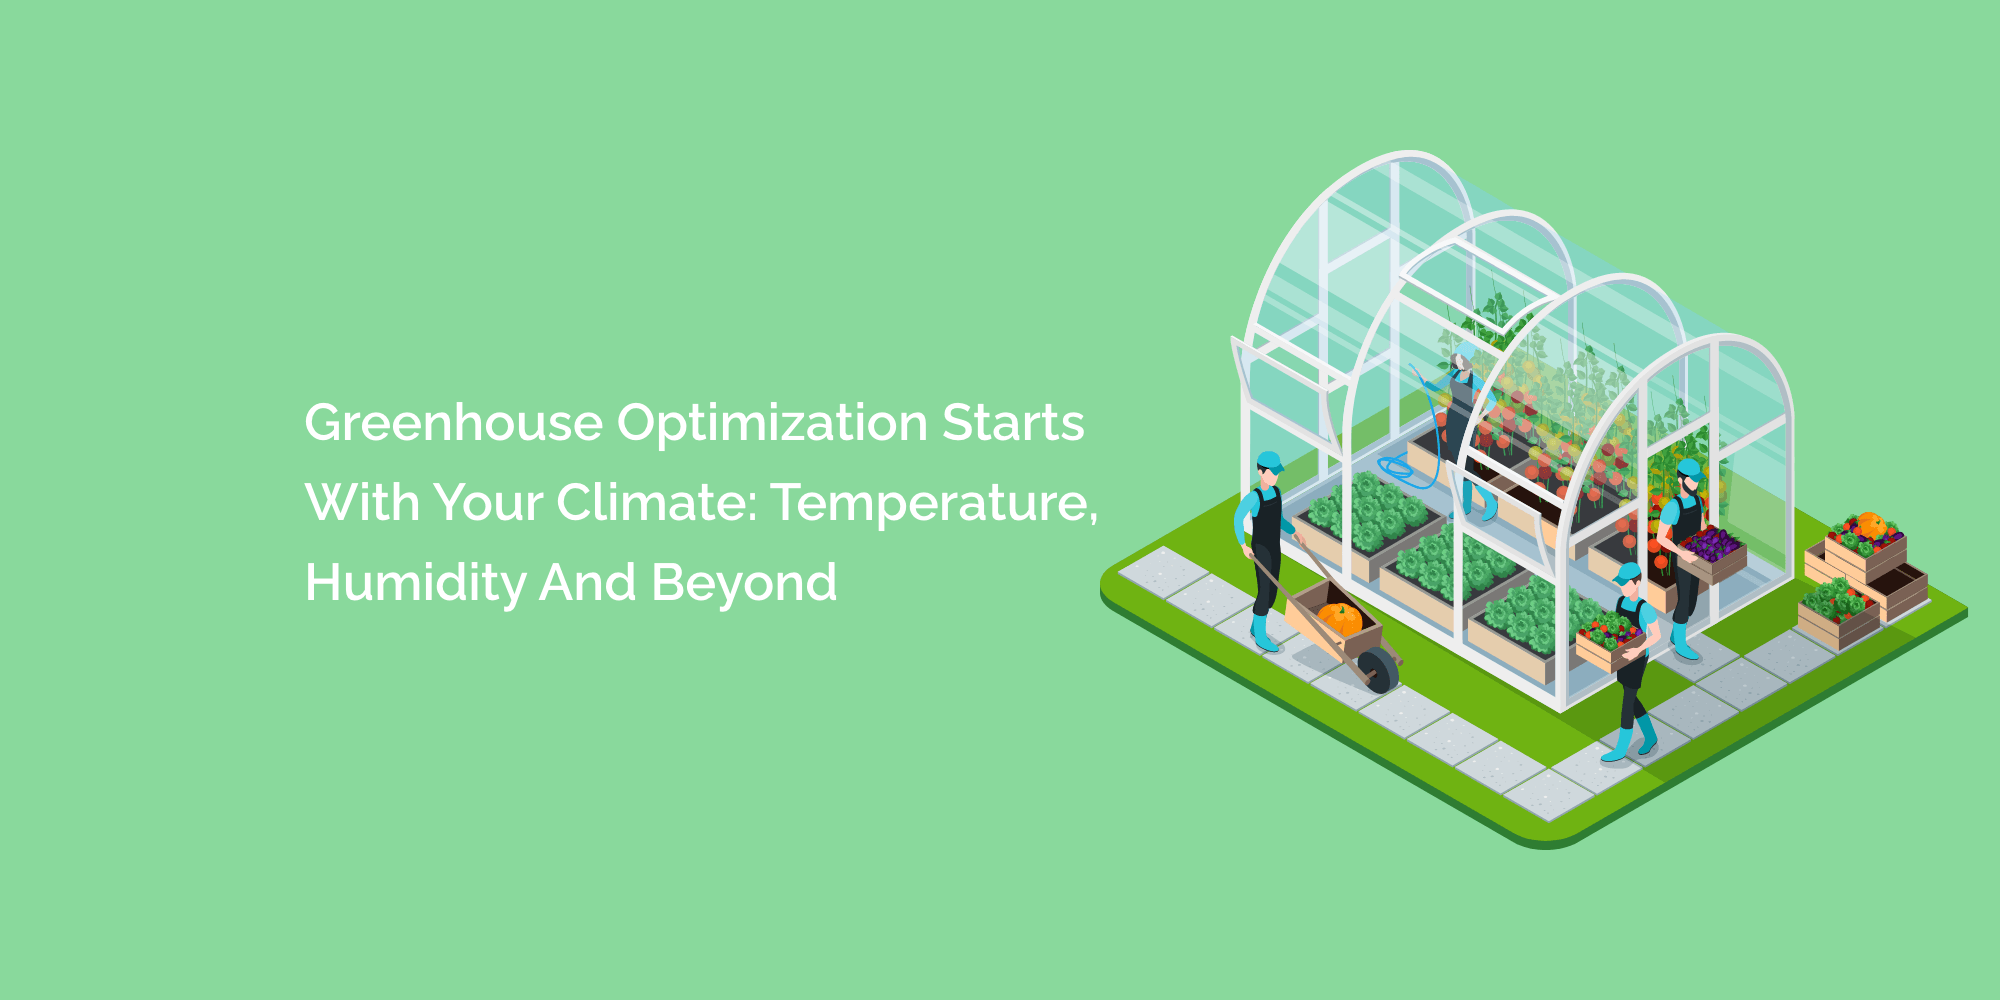 Greenhouse Optimization Starts With Your Climate: Temperature, Humidity and Beyond